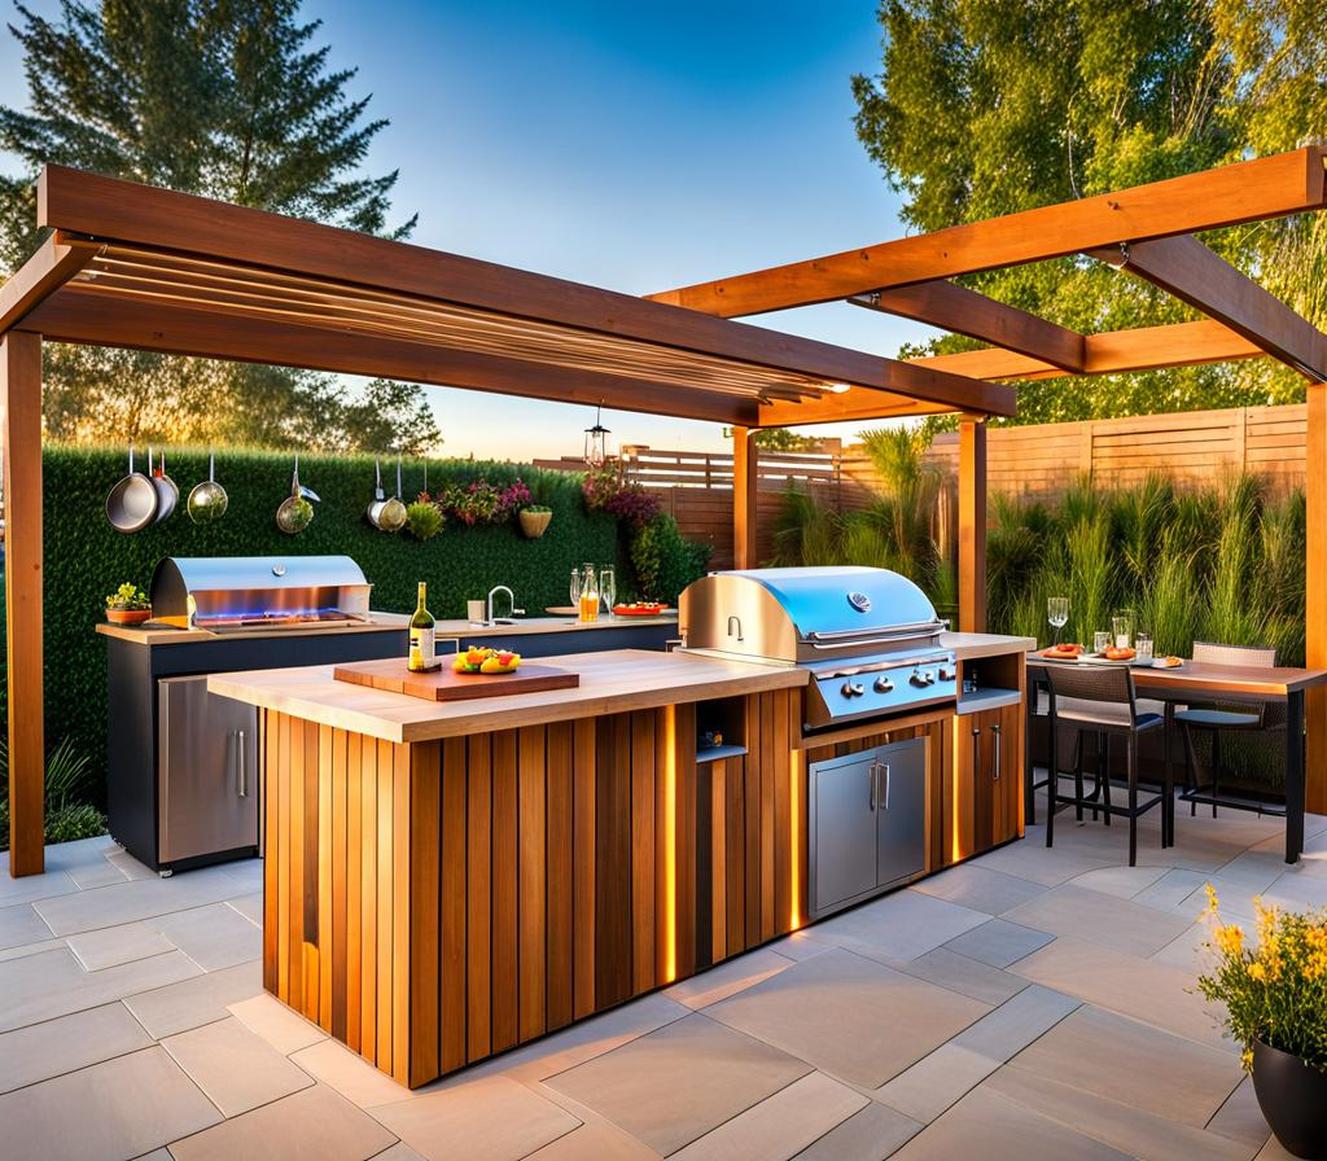 Grill in Style with a Custom Wooden Outdoor Kitchen